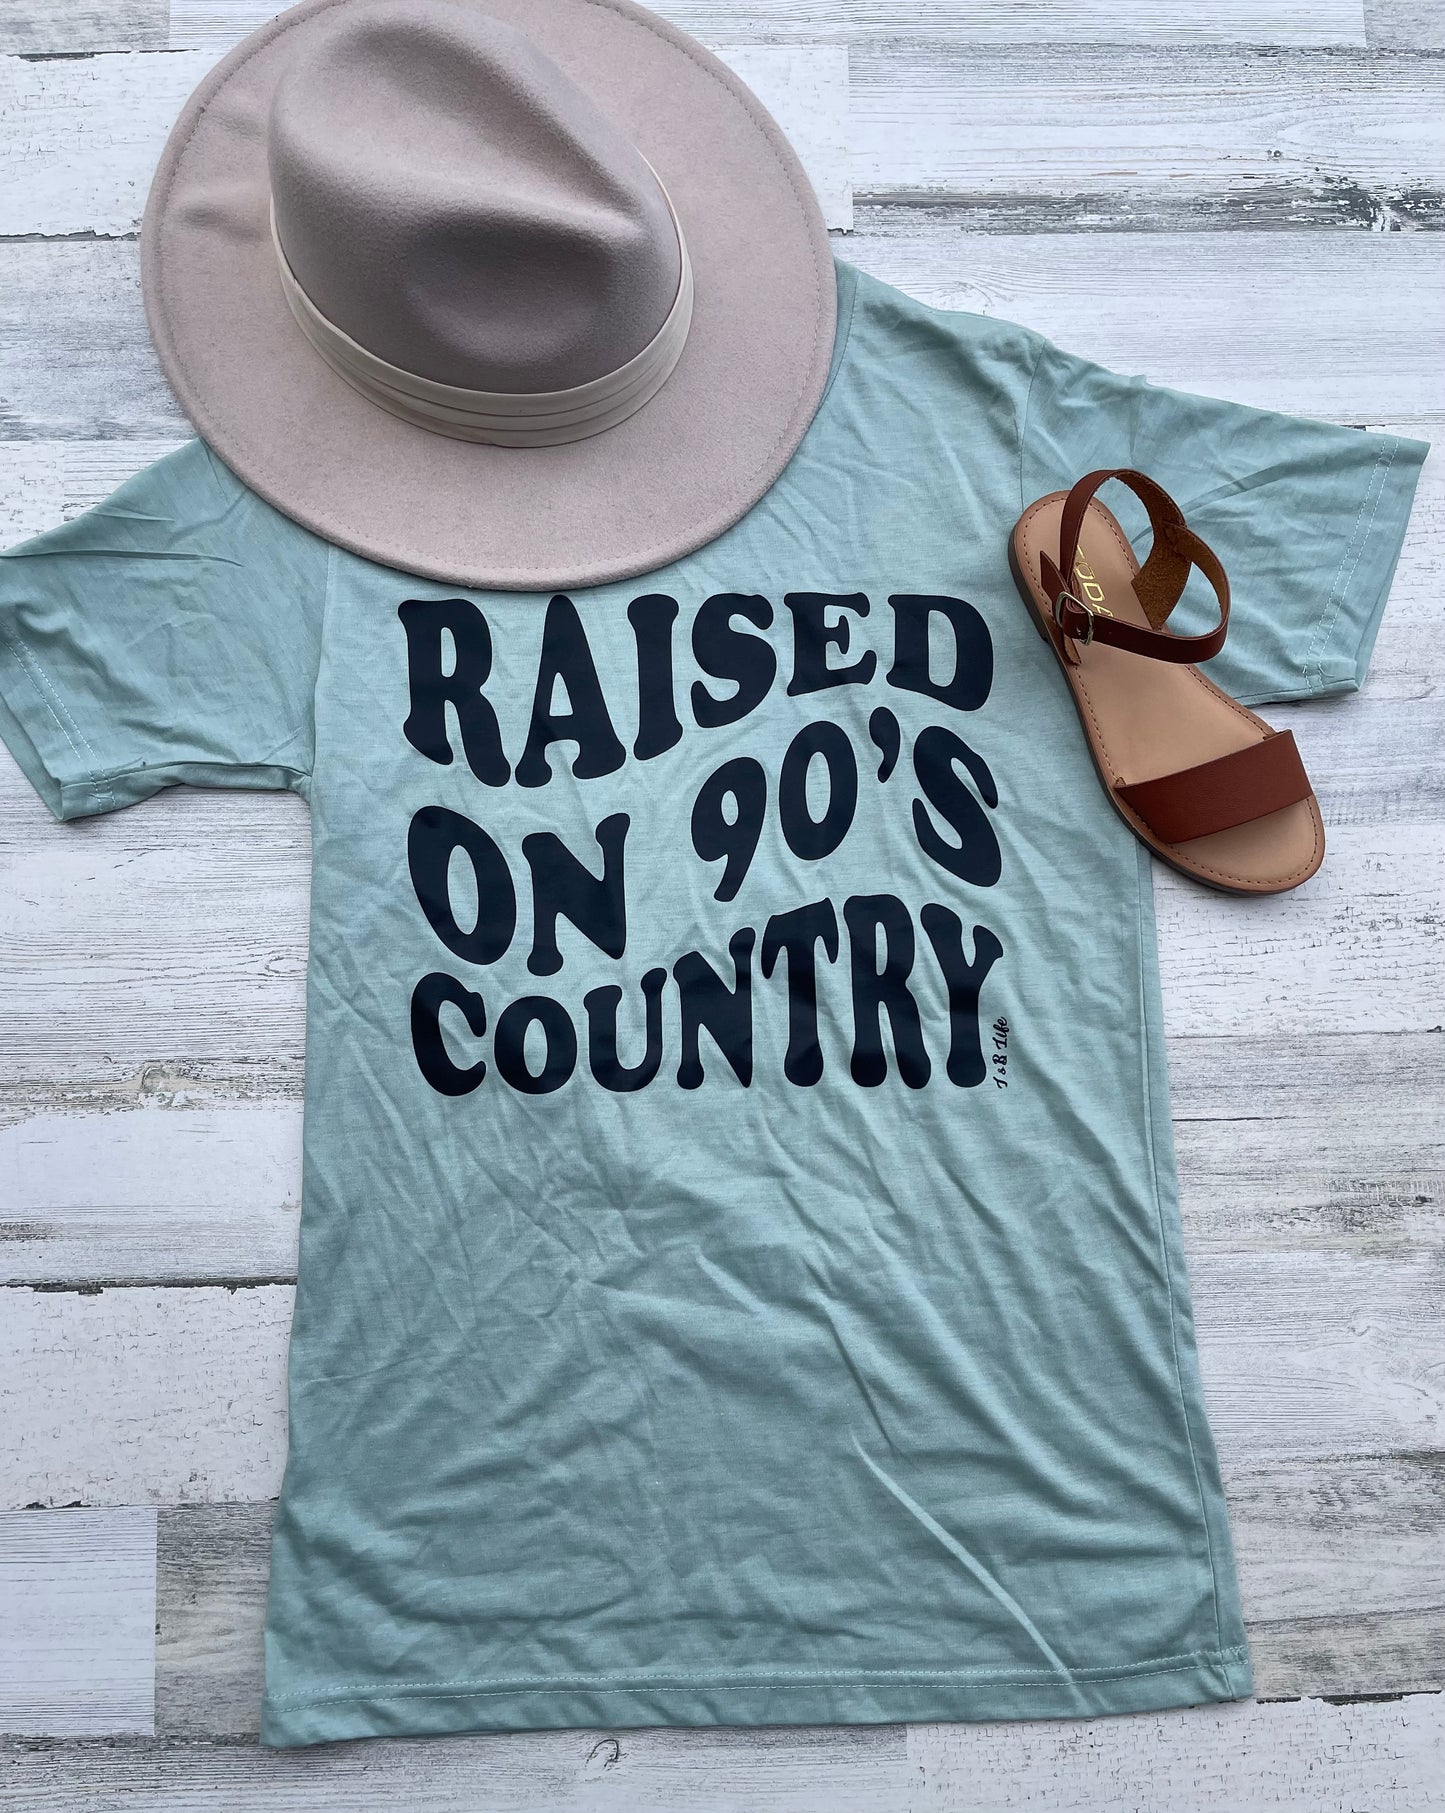 Raised on 90's Country